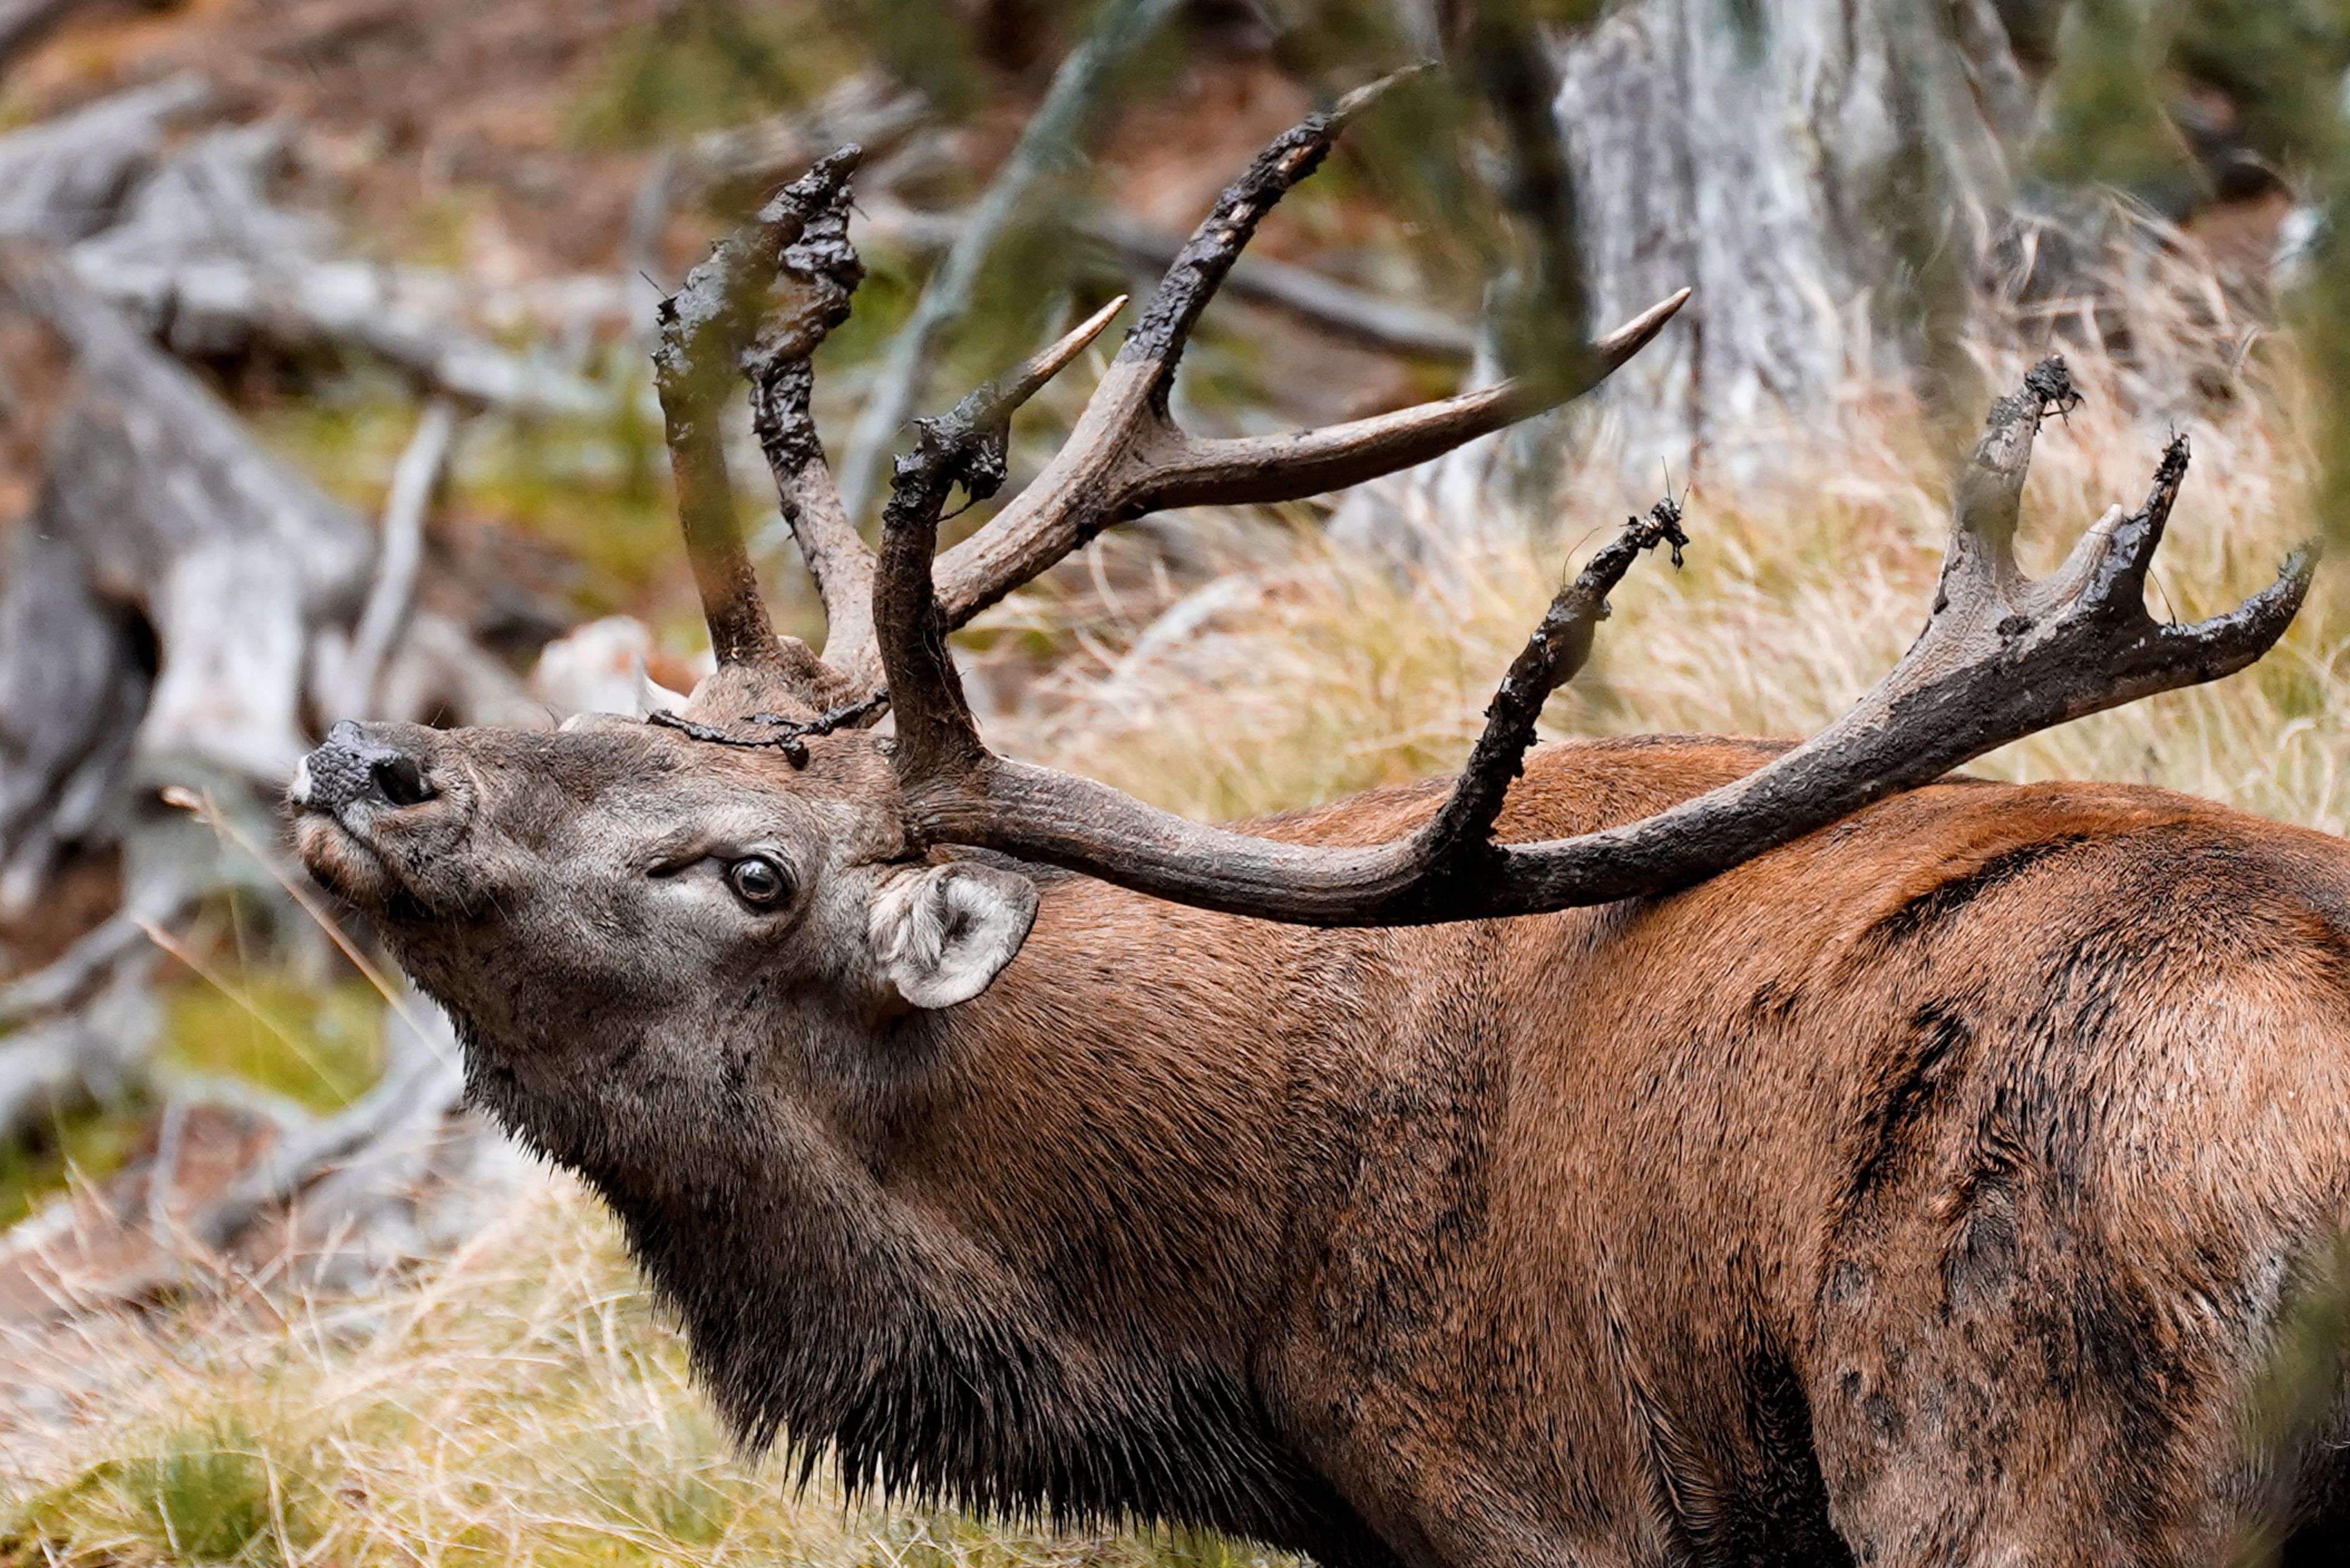 A roaring stag photographed by Marcel Grichting. It is most exciting in autumn, when the stags are in rut, says Grichting, Valais, Switzerland.